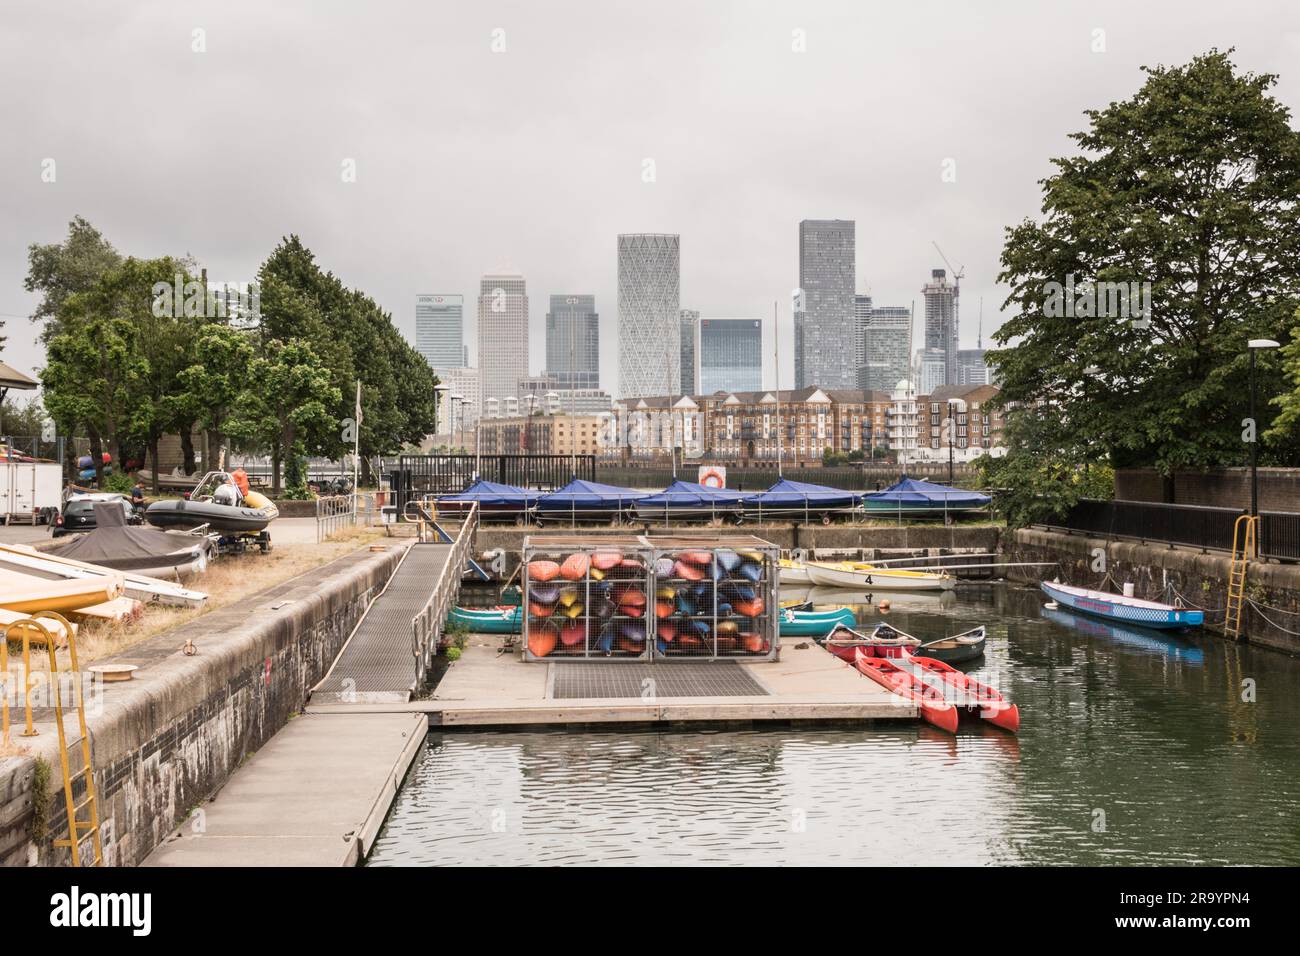 Colourful canoes and boats on Shadwell Basin with the skyscrapers of Docklands and Canary Wharf in the background, London, England, U.K. Stock Photo